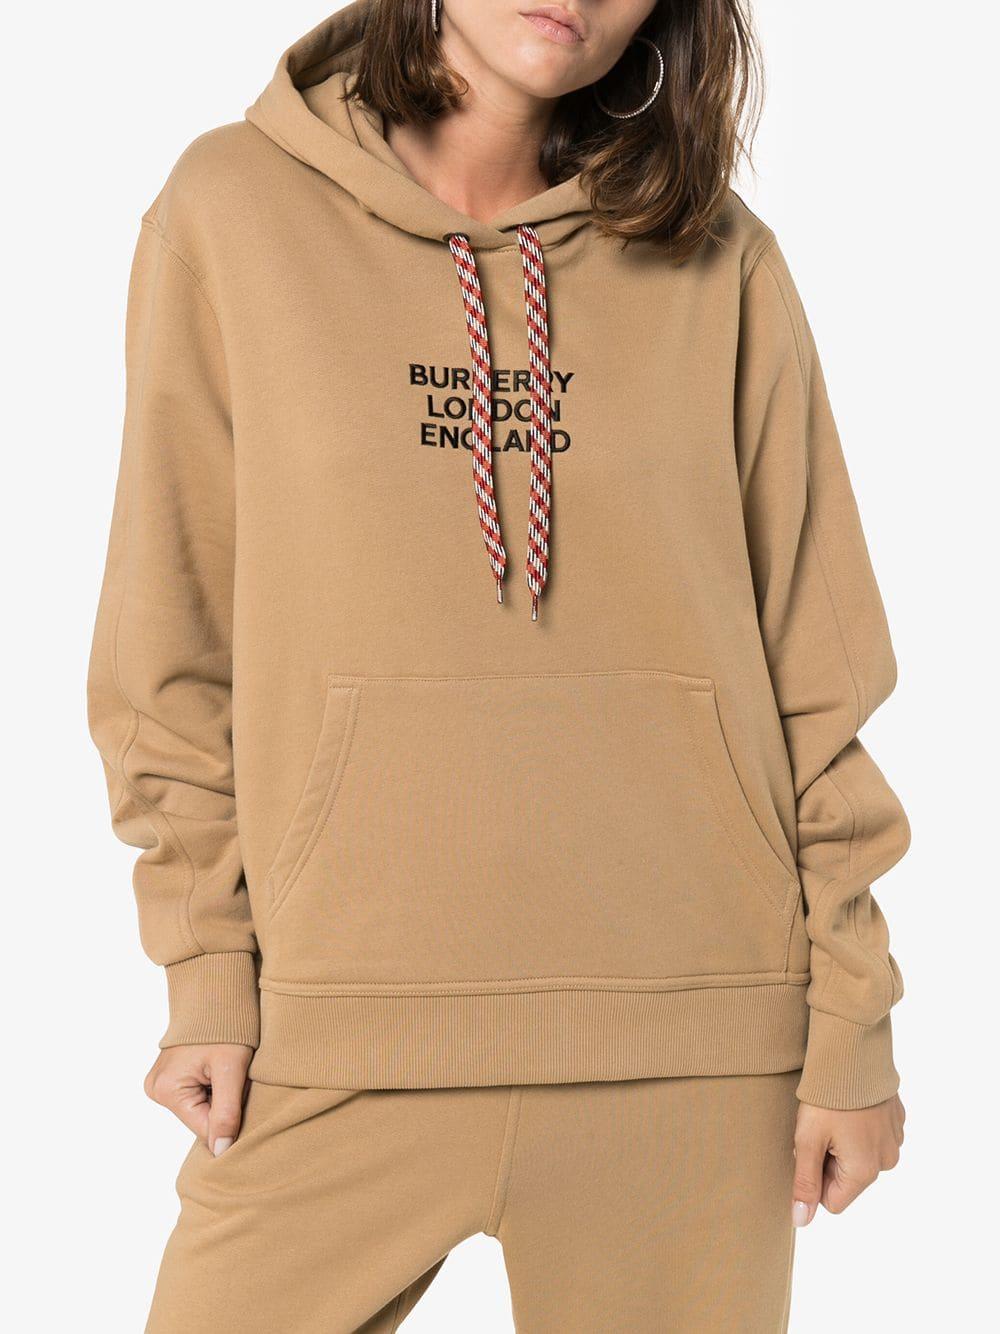 burberry hoodie brown Cheaper Than Retail Price> Buy Clothing, Accessories  and lifestyle products for women & men -